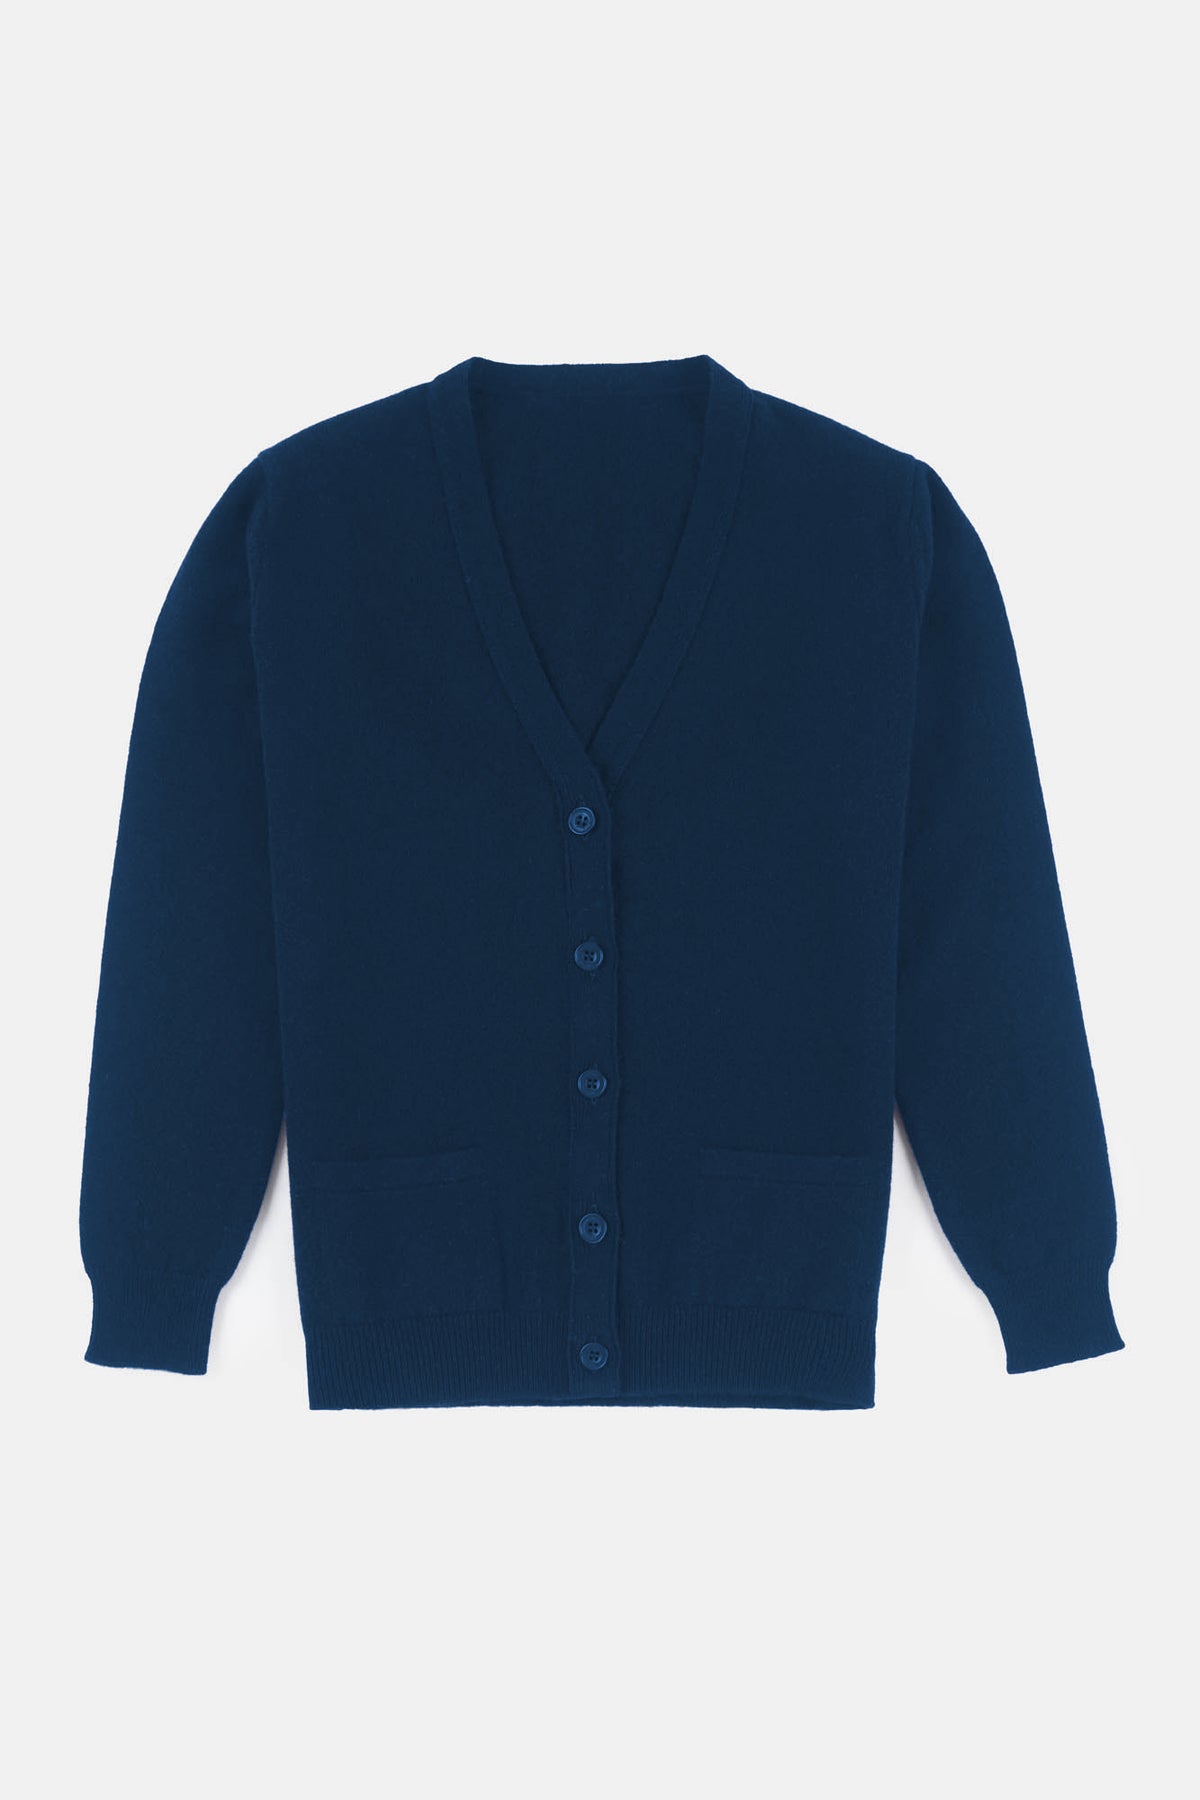 
            lambswool v neck cardigan in bright blue flatlay image